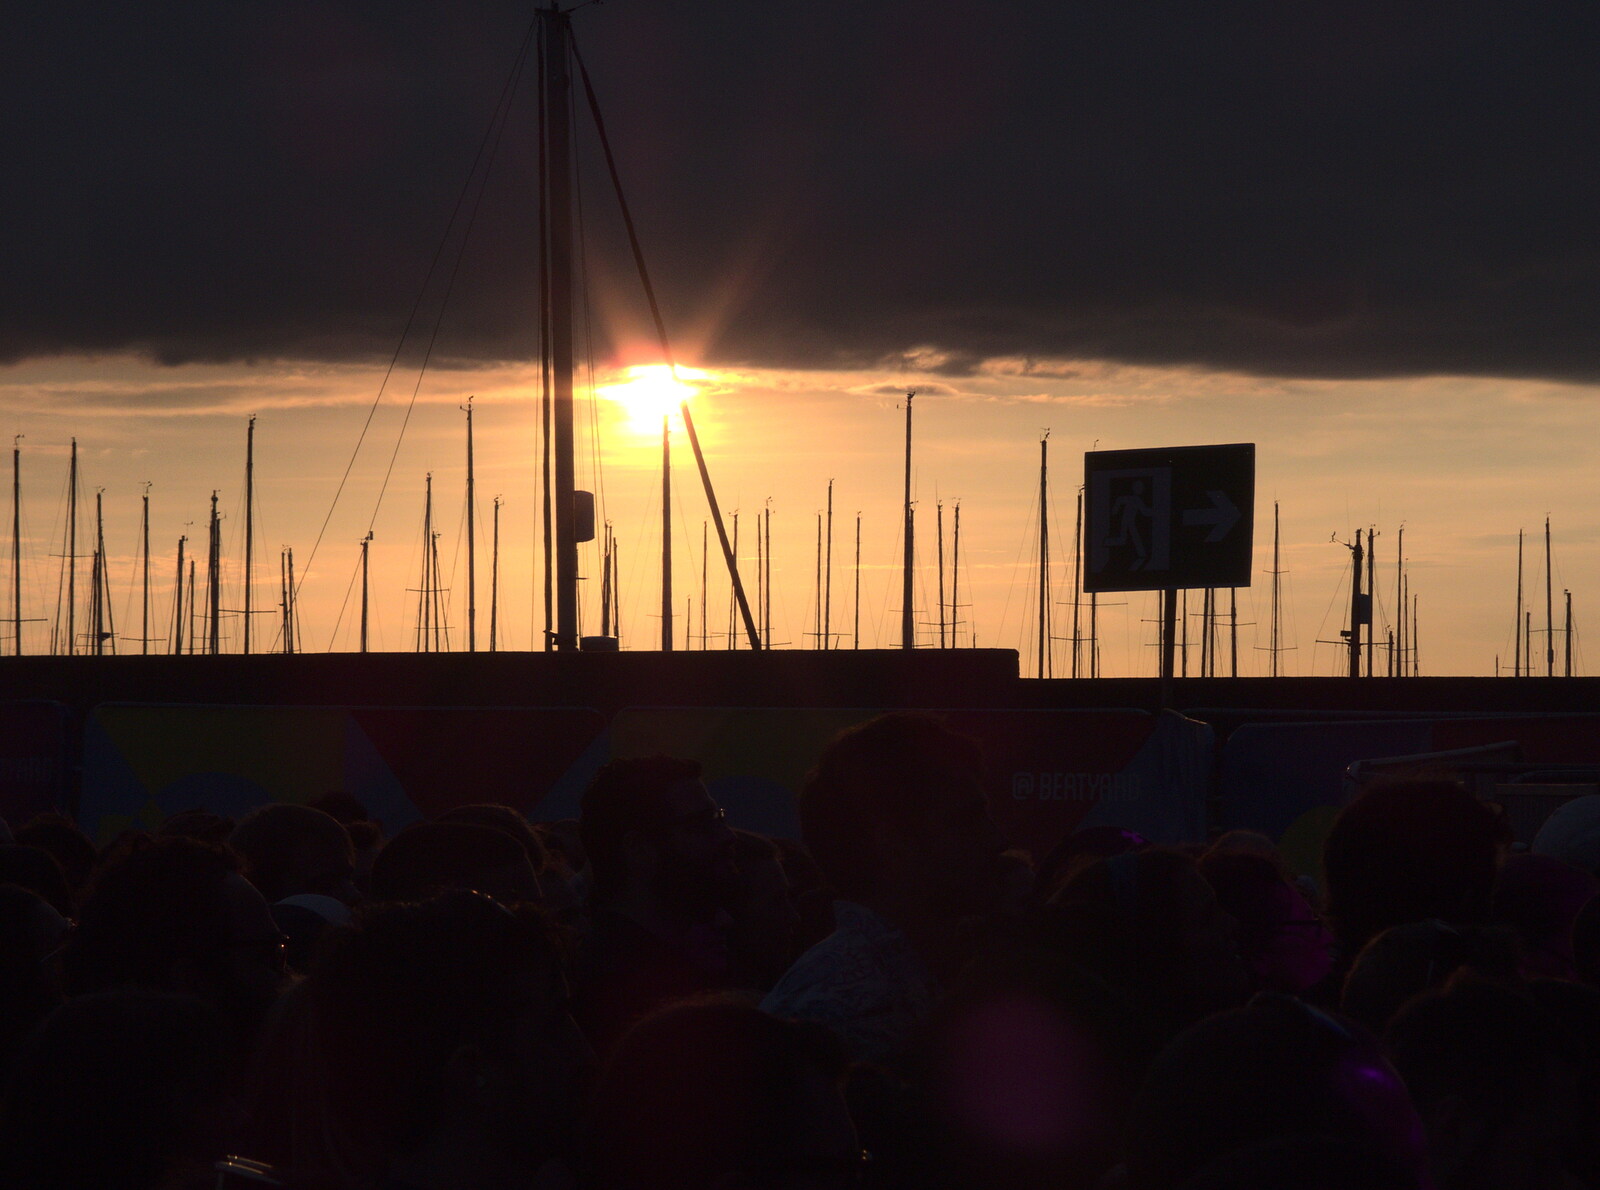 The masts in the nearby marina in the sunset from Beatyard Festival, Dún Laoghaire, County Dublin, Ireland - 5th August 2018